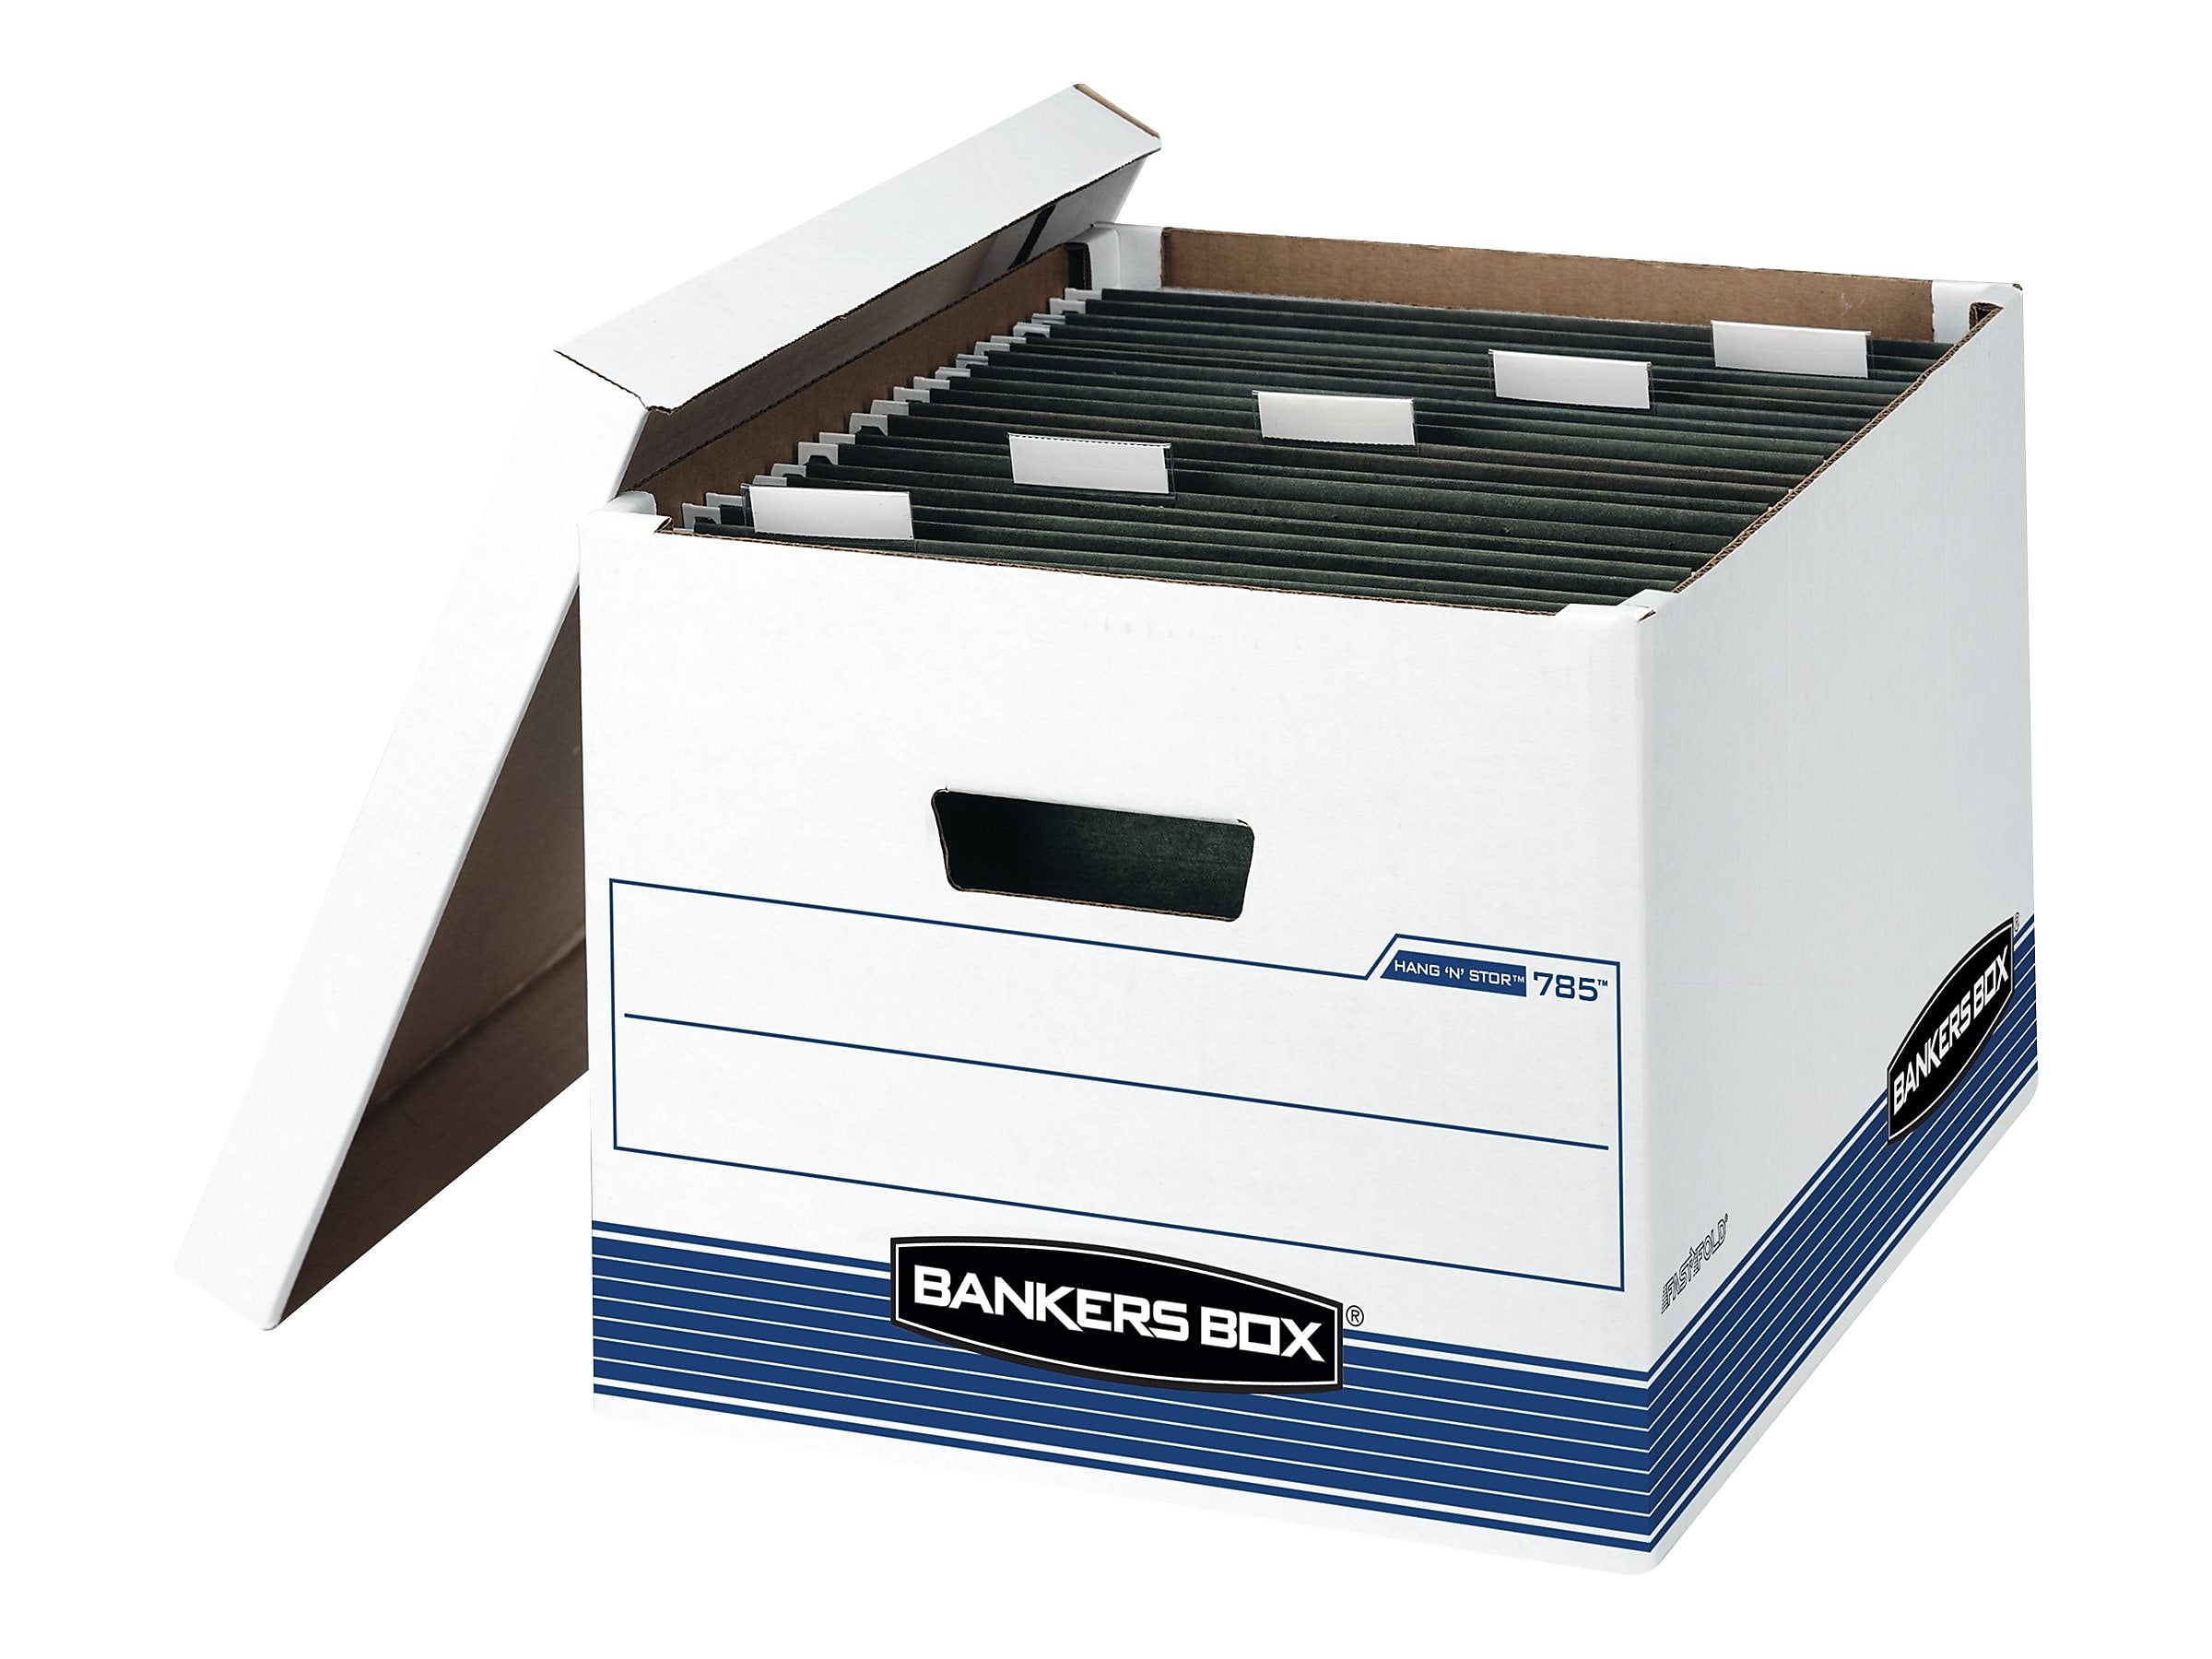 Bankers Box Medium-Duty FastFold Corrugated File Boxes, Lift-off Lid, Letter/Legal Size, White/Blue, 4/Carton